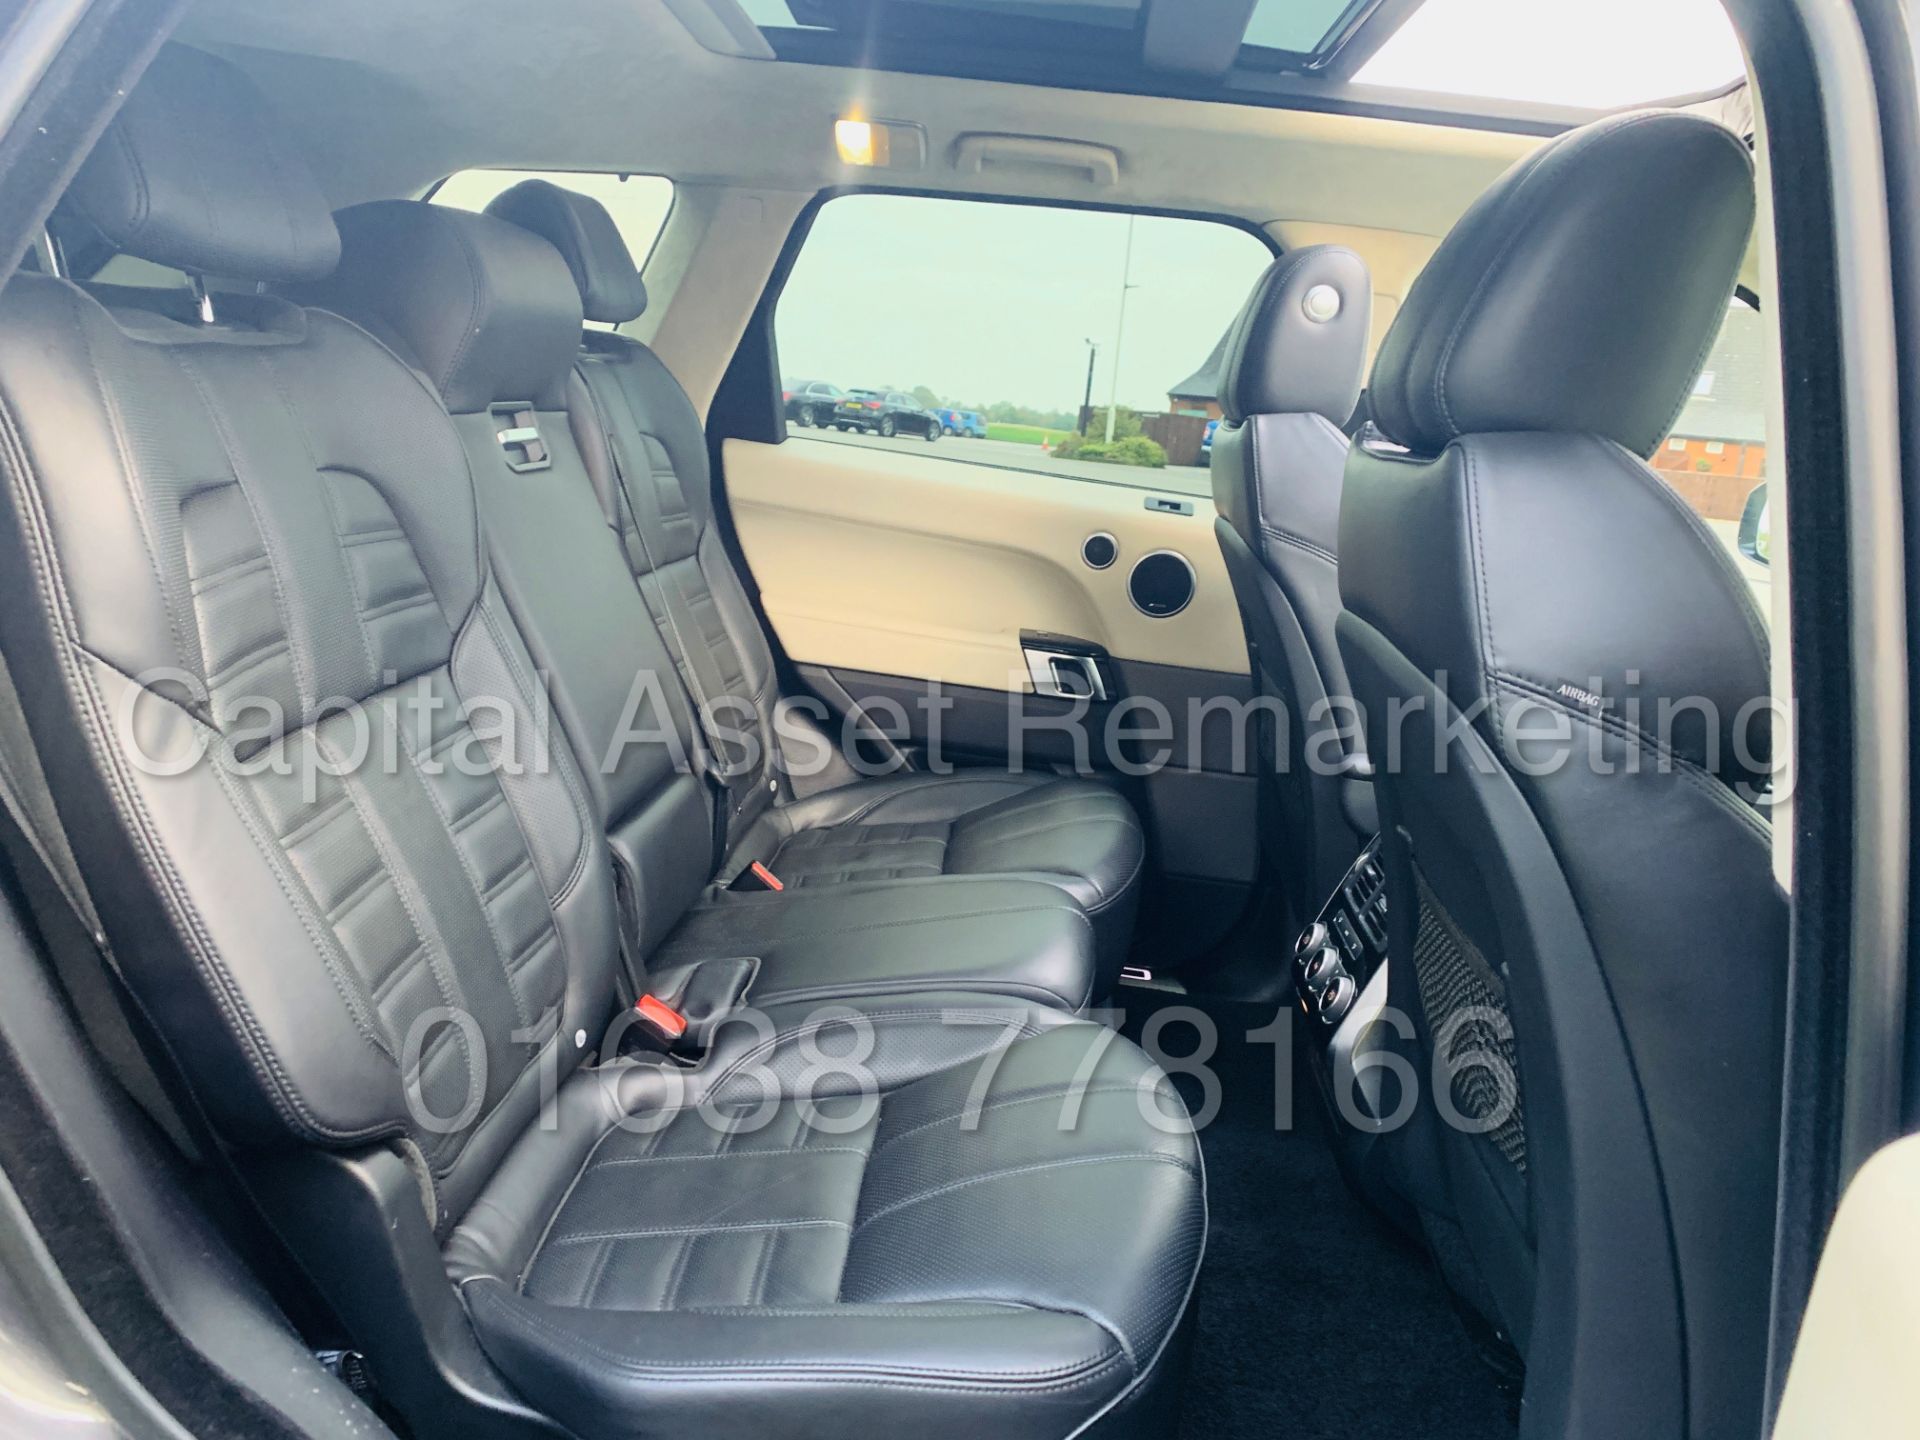 (ON SALE) RANGE ROVER SPORT "AUTOBIOGRAPHY DYNAMIC" 3.0 SDV6 AUTO - ULTIMATE SPEC - 16 REG -1 KEEPER - Image 39 of 70